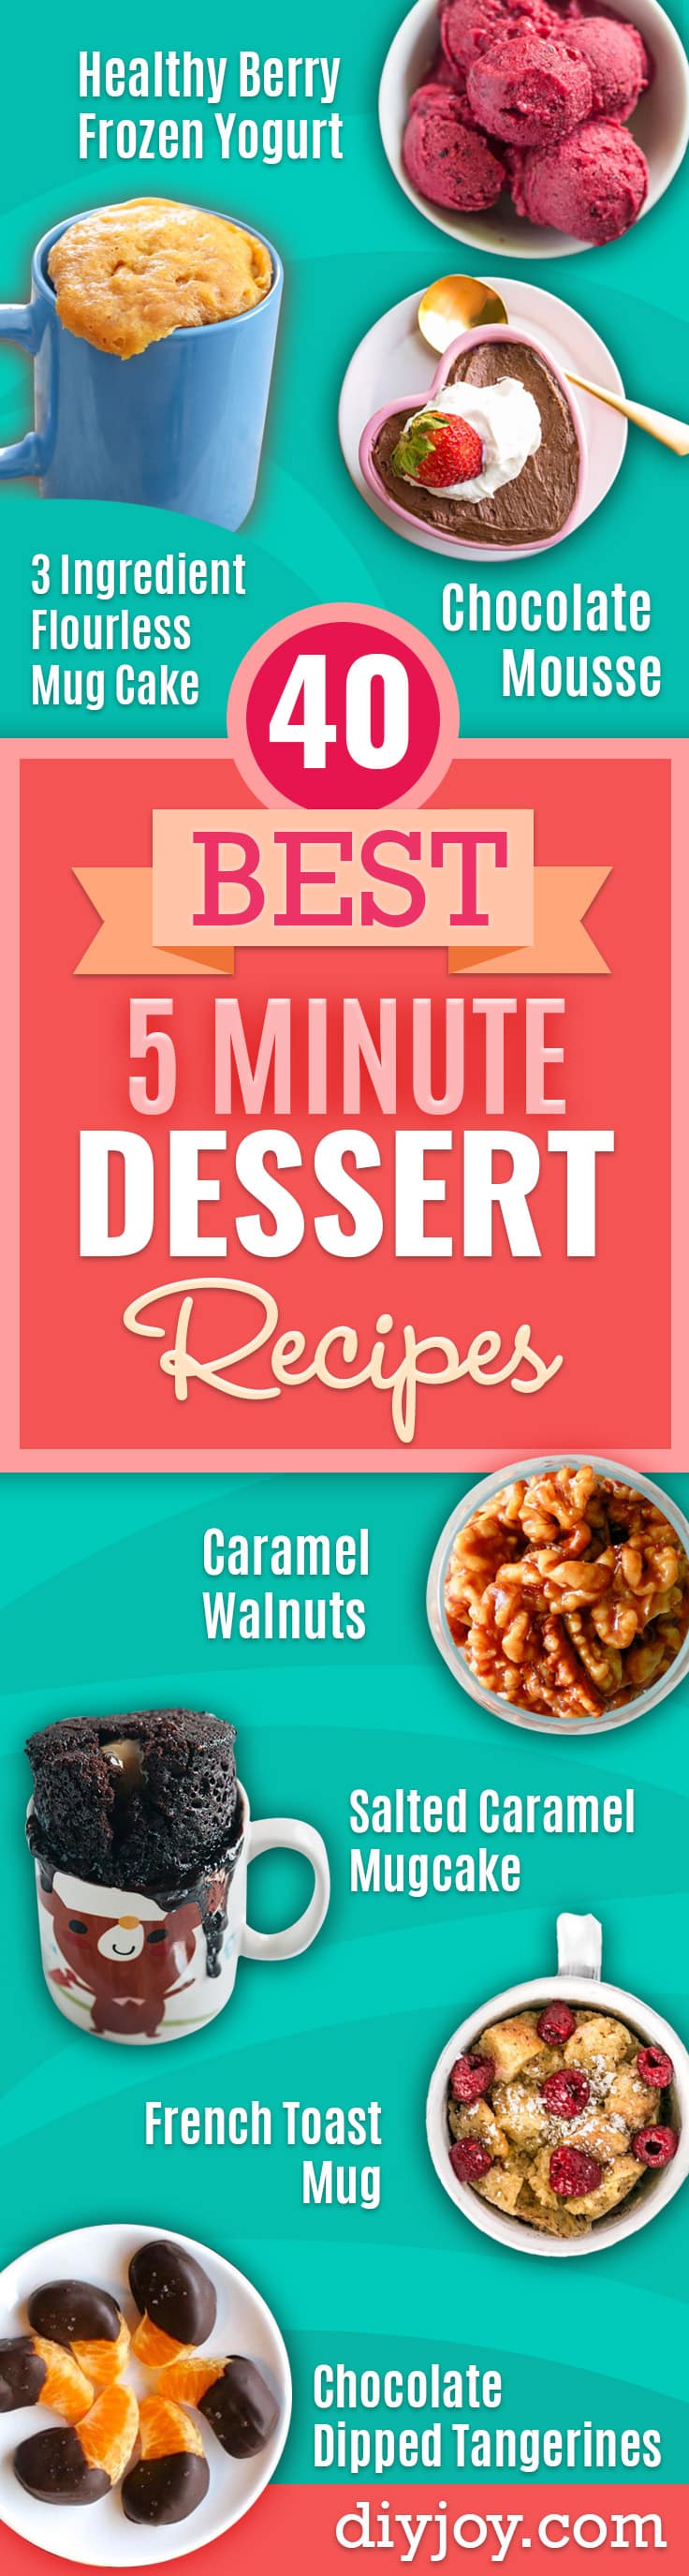 Easy Dessert Recipes -Quick Five Minute Dessert Ideas - Fast Desserts to Make In Minutes - Sweet Treats, Cookies, Cake, Bars, Mousse Ice Cream and Snack Ideas